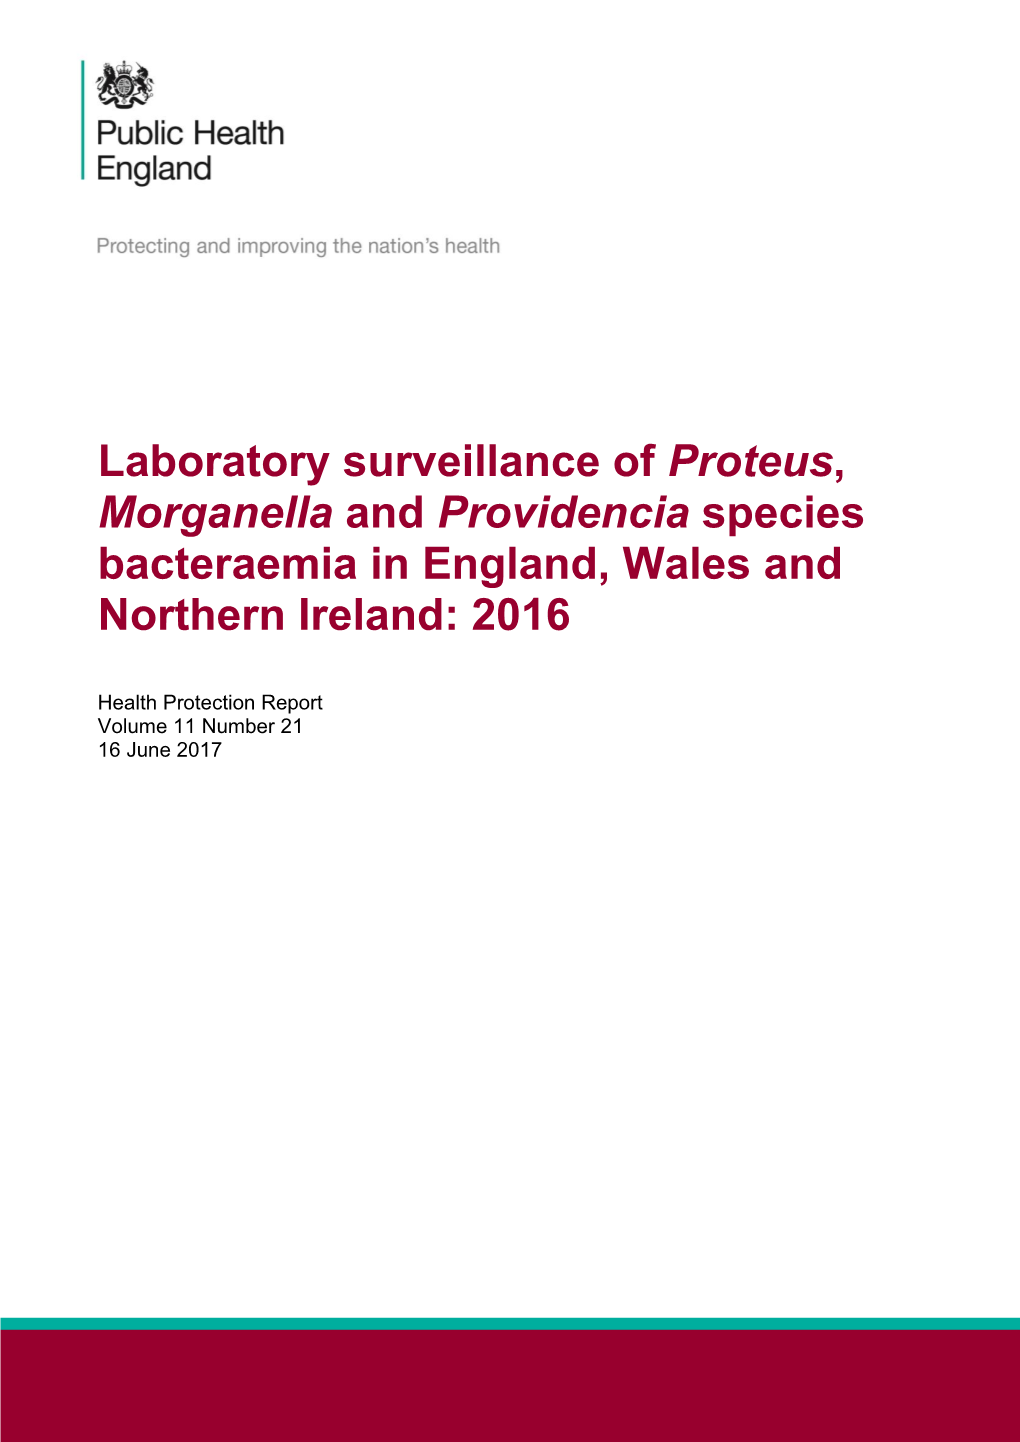 Laboratory Surveillance of Proteus, Morganella and Providencia Species Bacteraemia in England, Wales and Northern Ireland: 2016